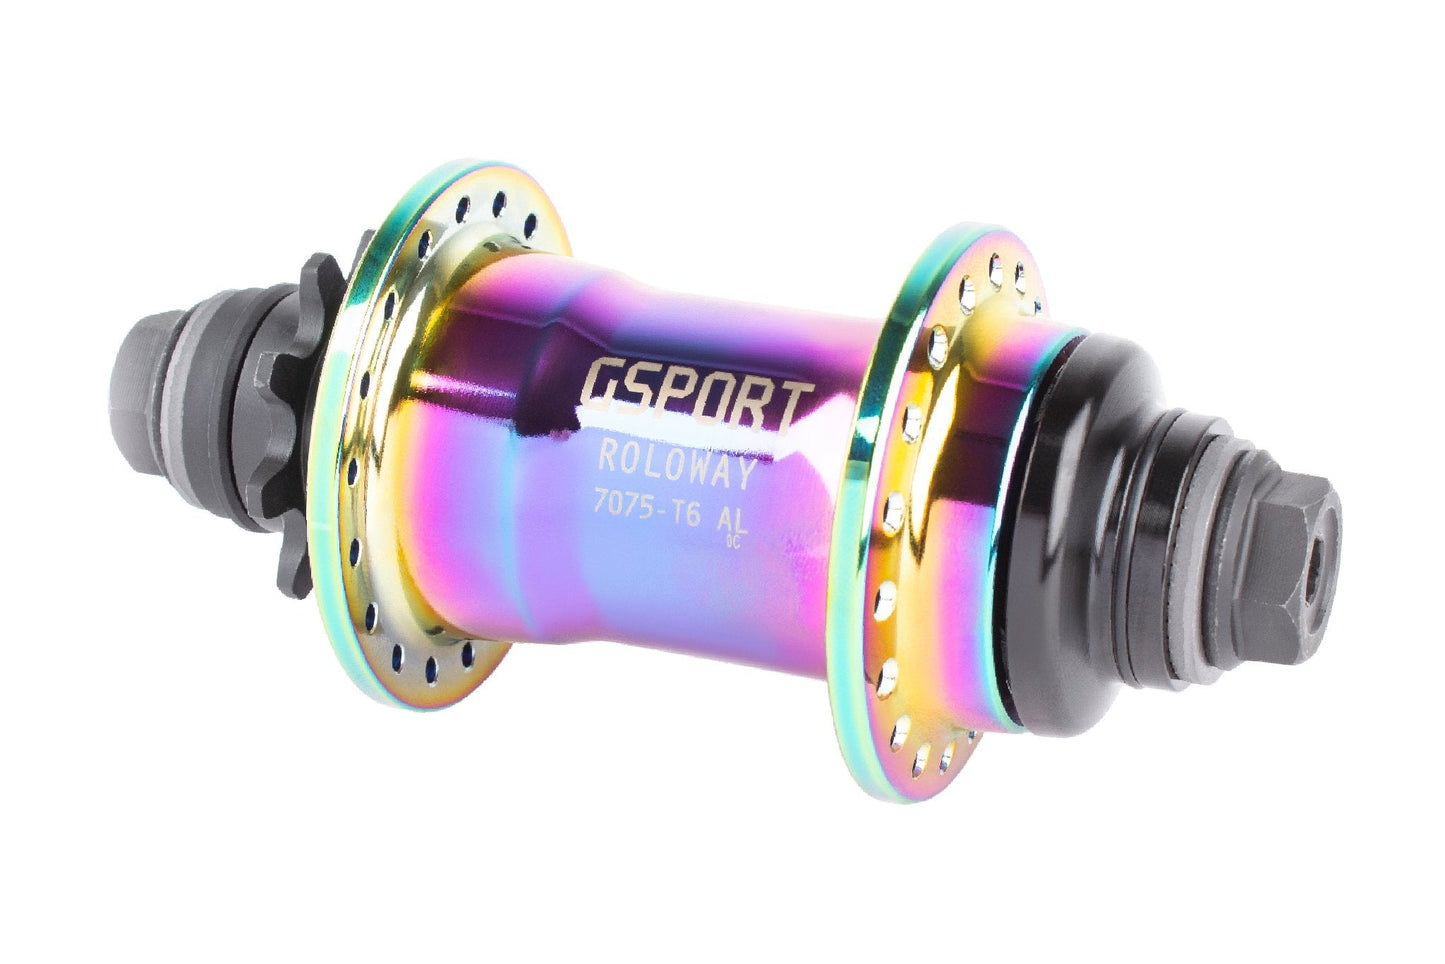 GSport Roloway Cassette Hub (Limited Edition Oil Slick)